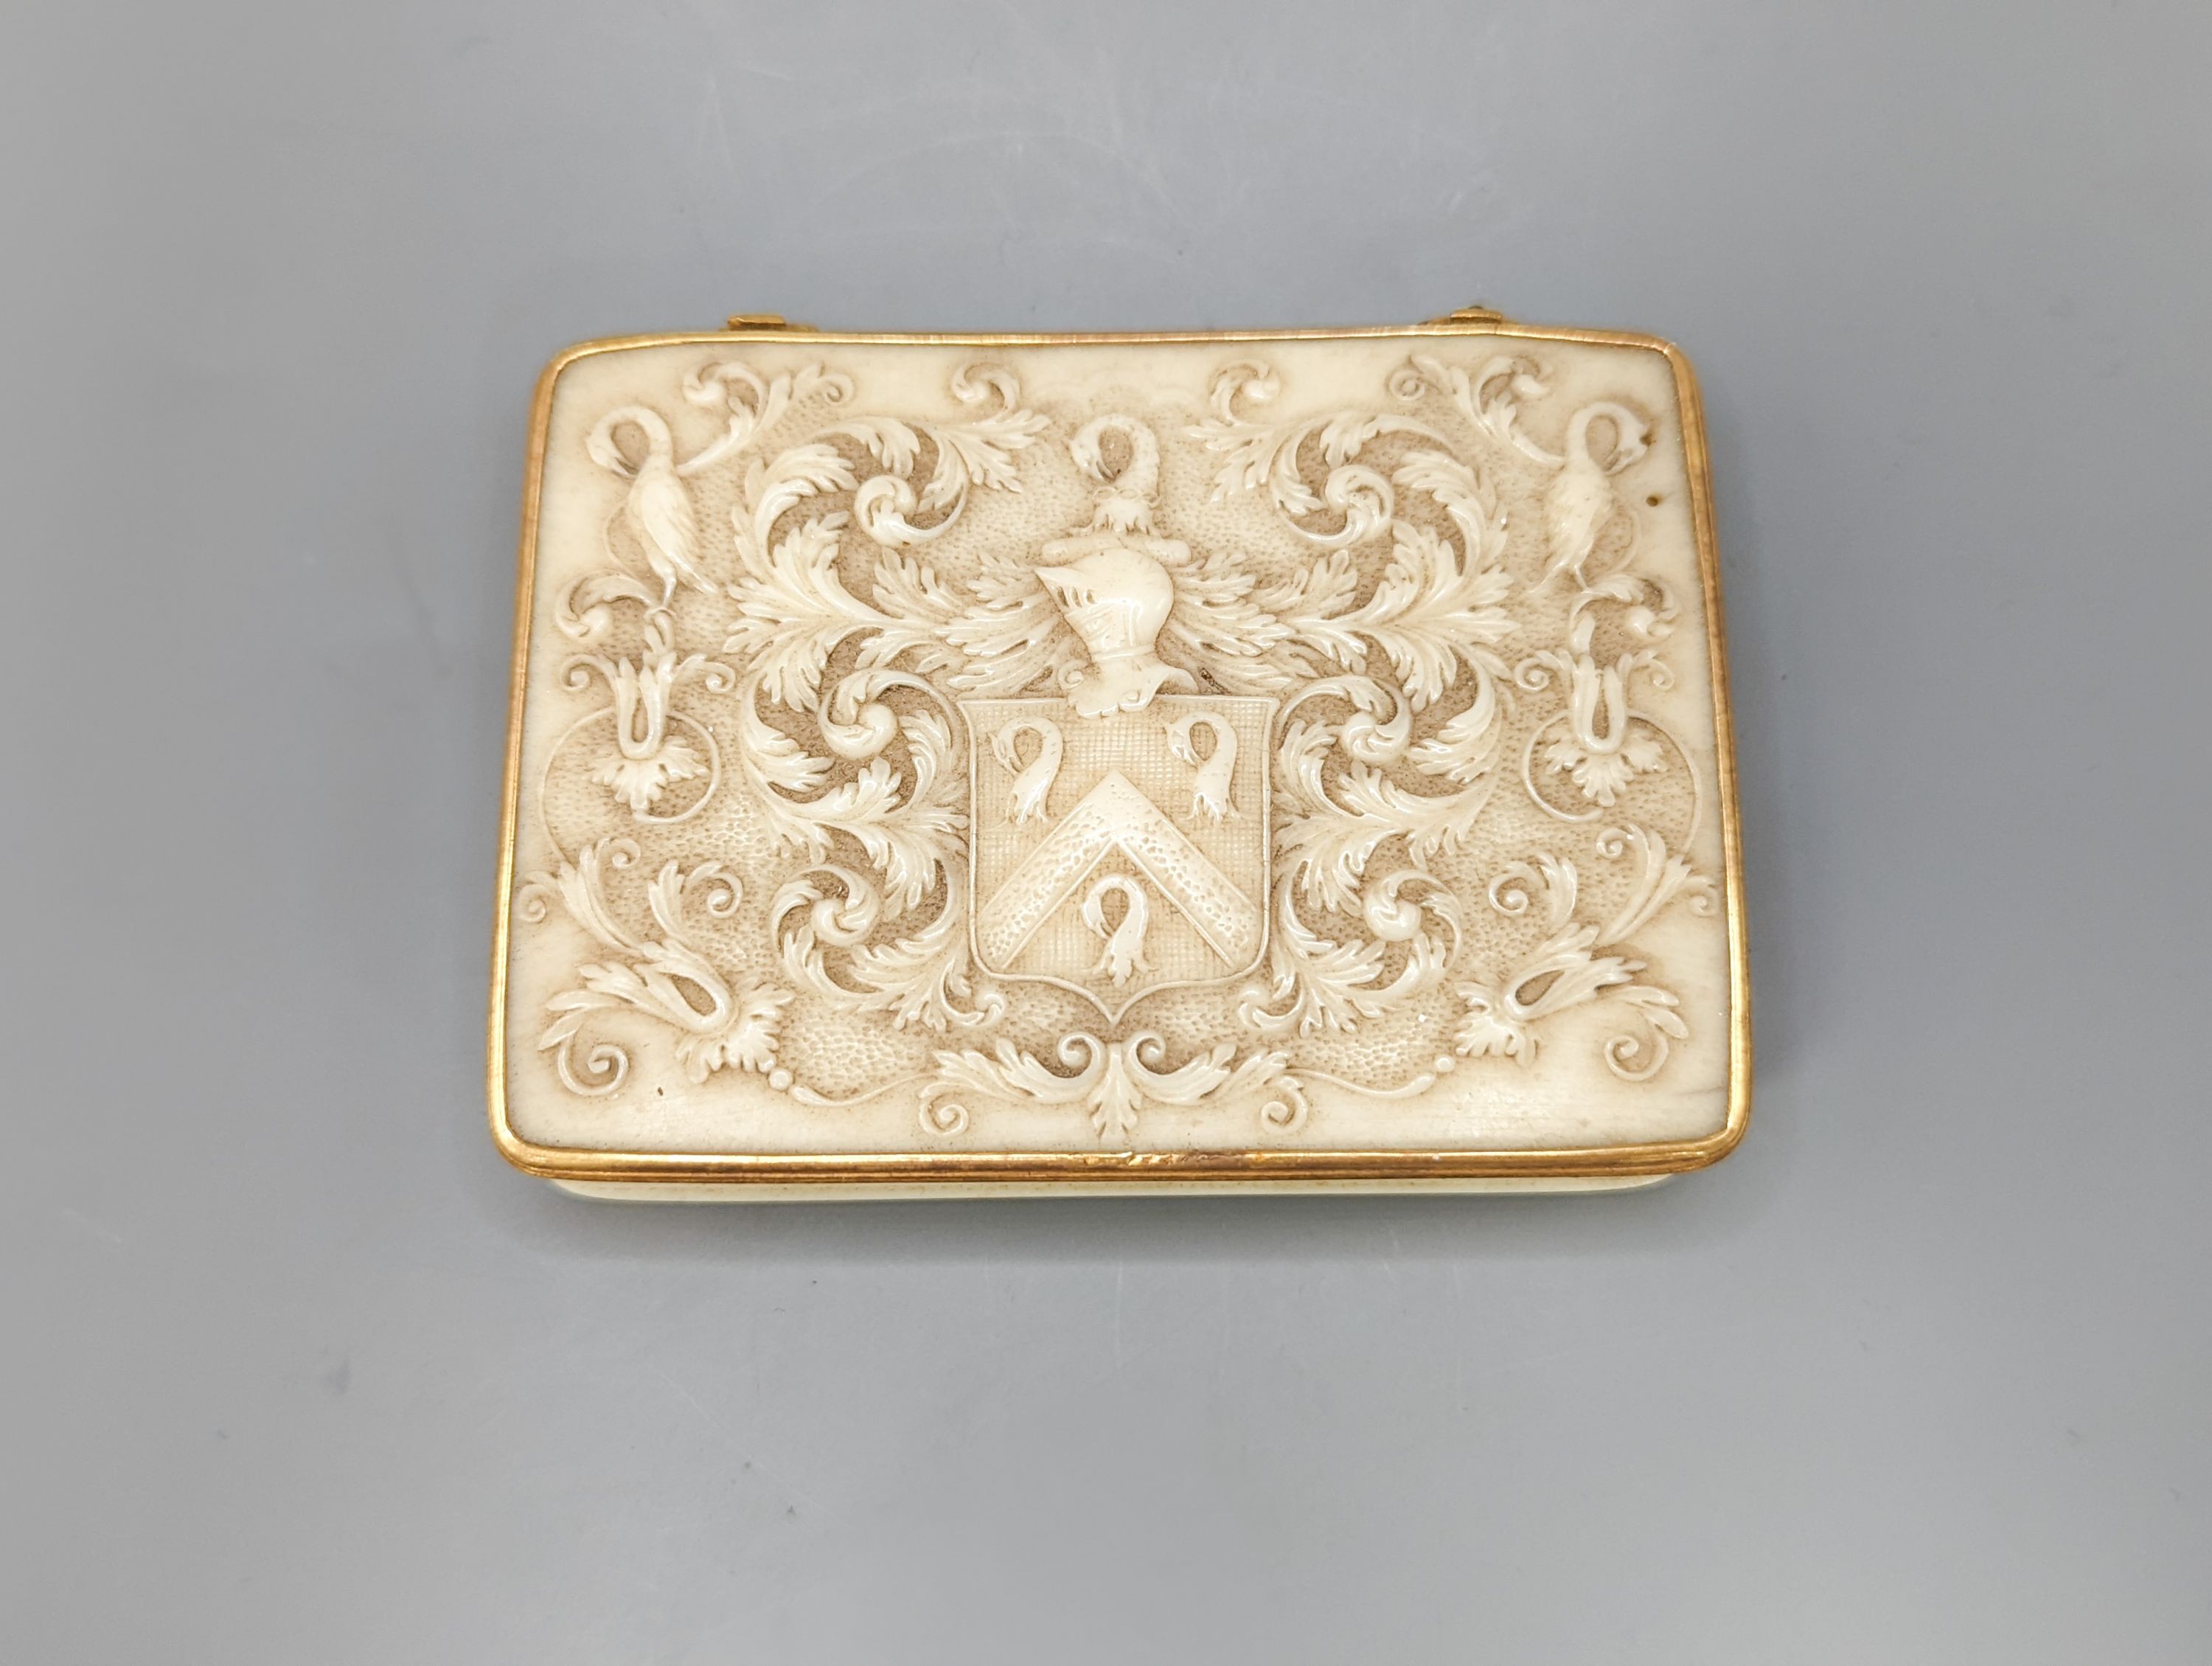 An early 19th century gold mounted ivory armorial table snuff box, 8.3 cm